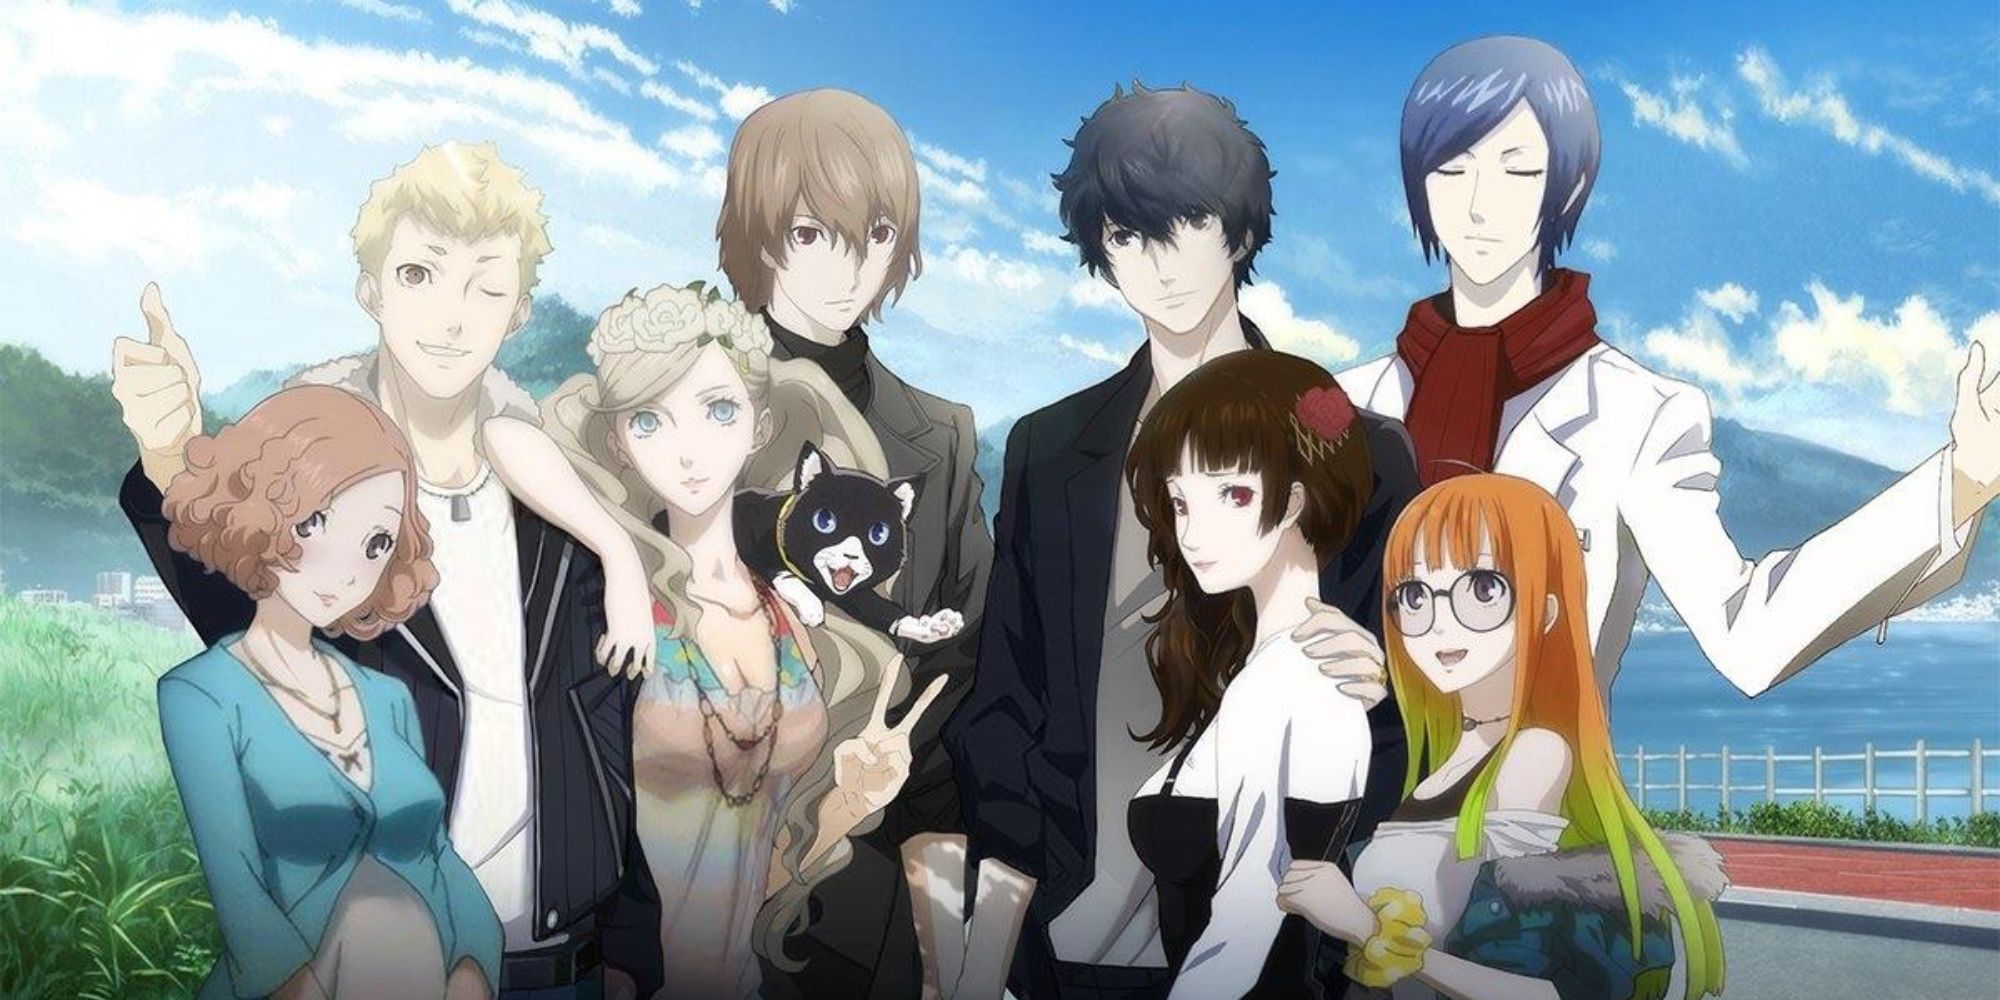 Persona 5 Royal's New Ending Fixes A Major Flaw In The Original